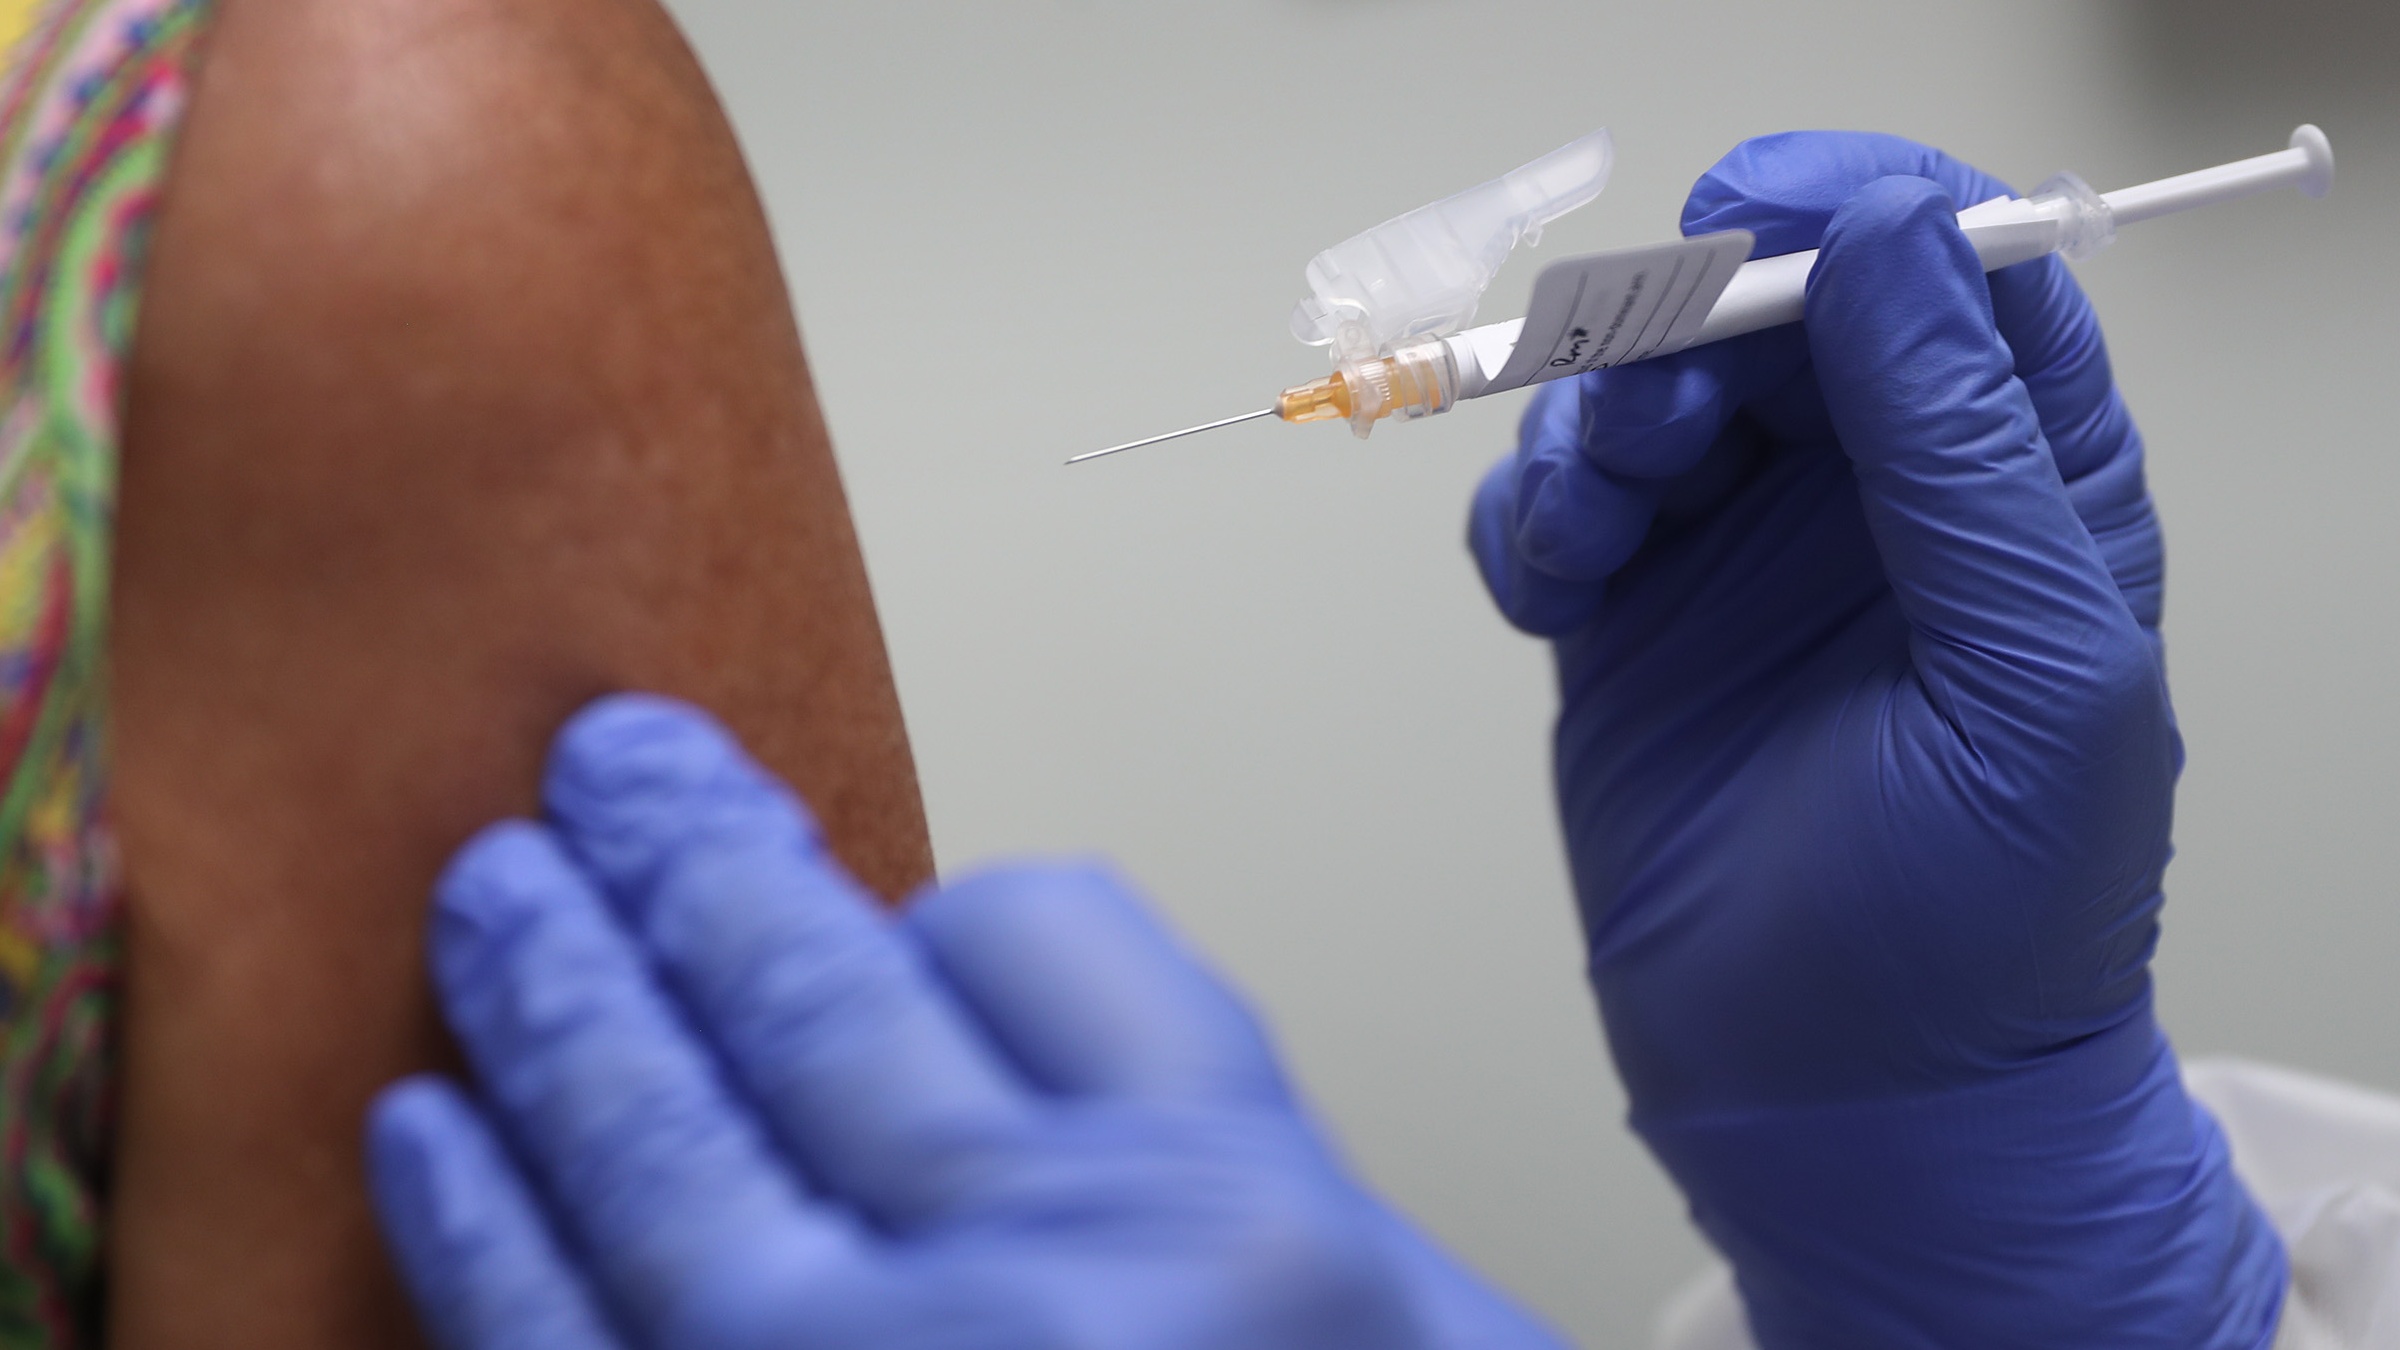 Woman receives an injection of a Covid vaccine during a clinical trial.